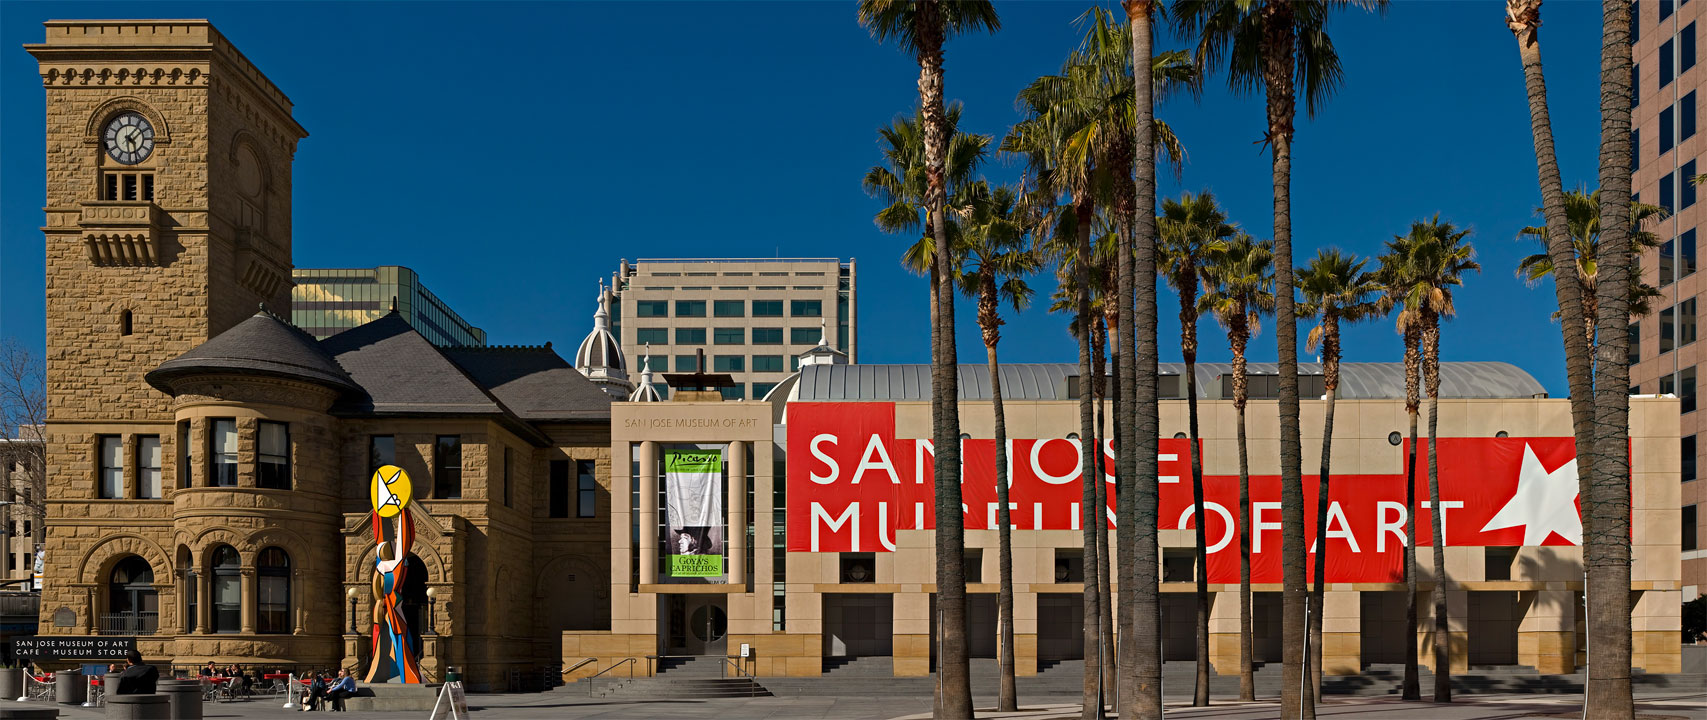 The exterior of the San Jose Museum of Art